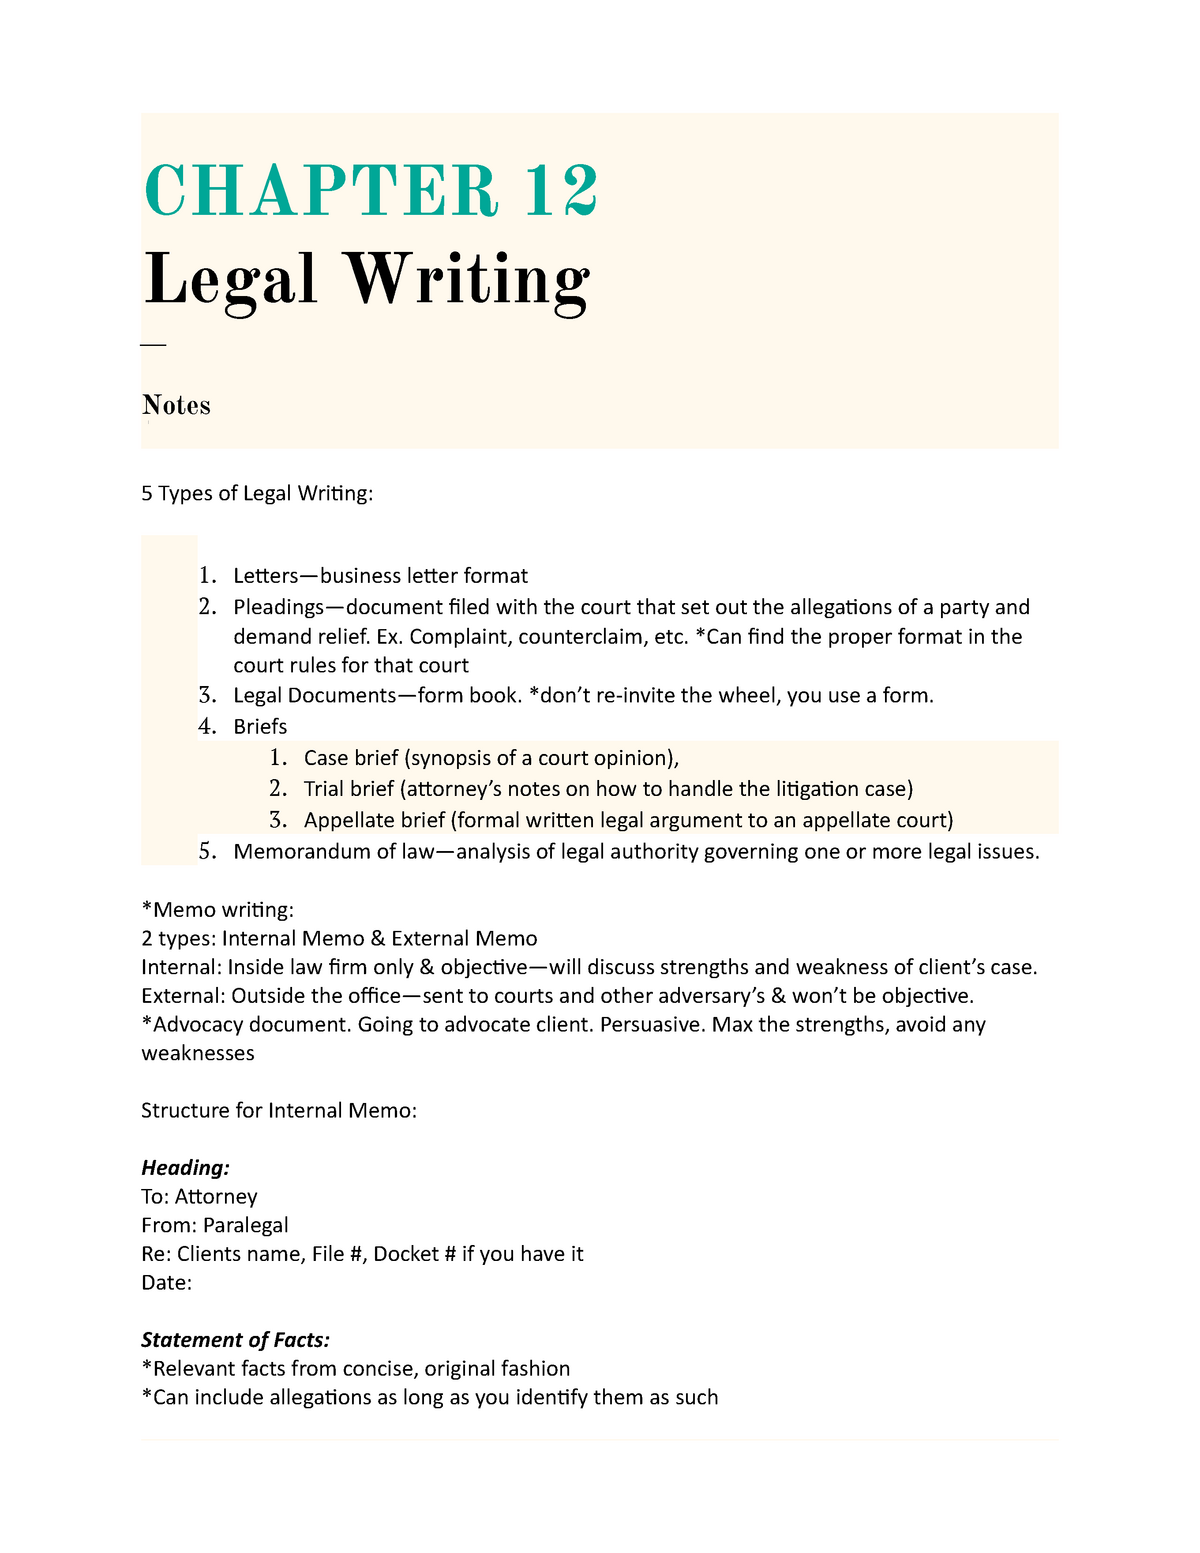 is essay writing legal